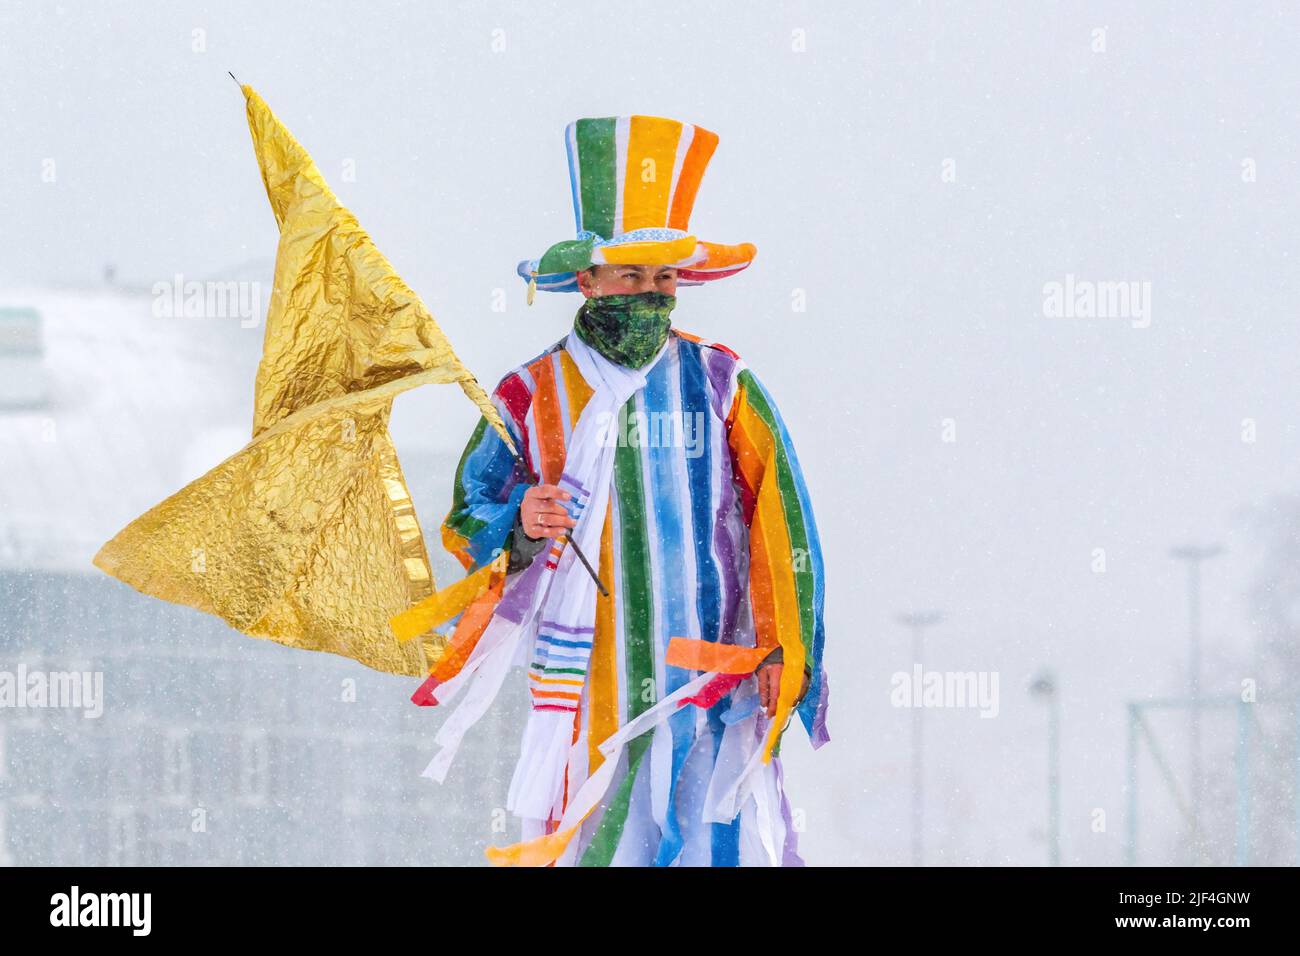 Minsk, Belarus - February 25, 2017: Animator at a sports festival dressed in rainbow colors with a golden flag Stock Photo